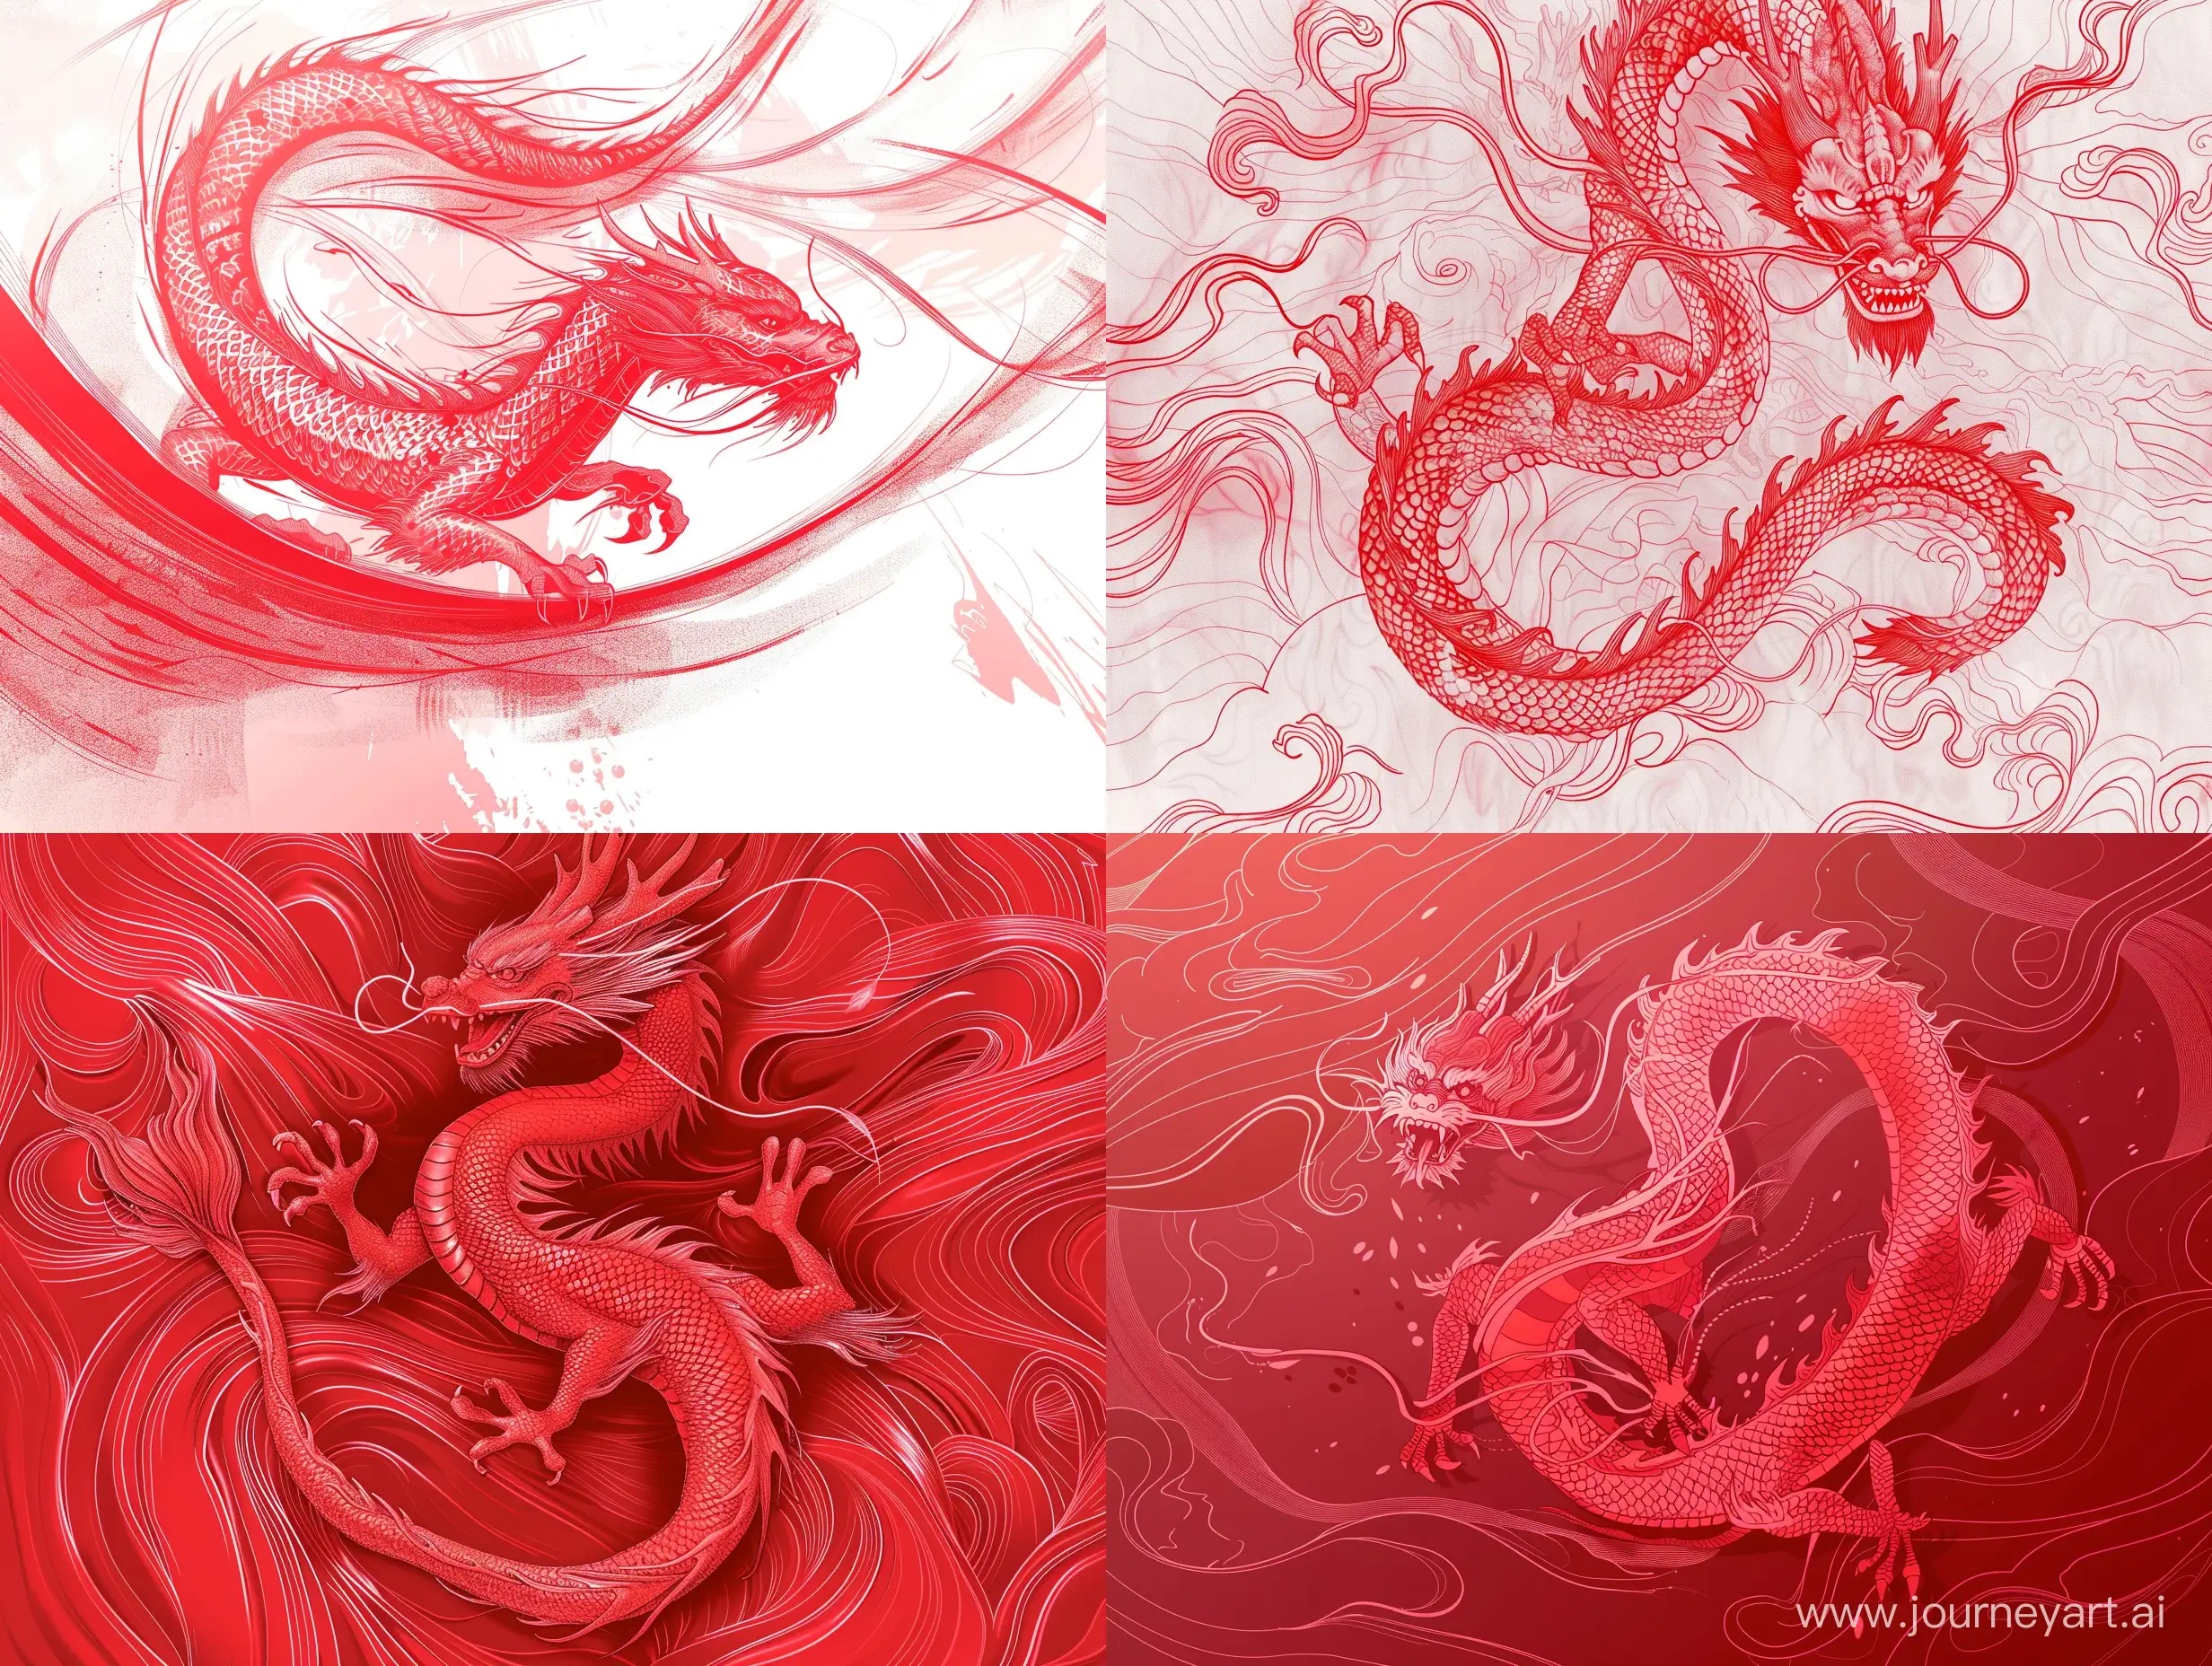 Dynamic-Red-Chinese-Dragon-Sketch-Detailed-Tattoo-Style-Art